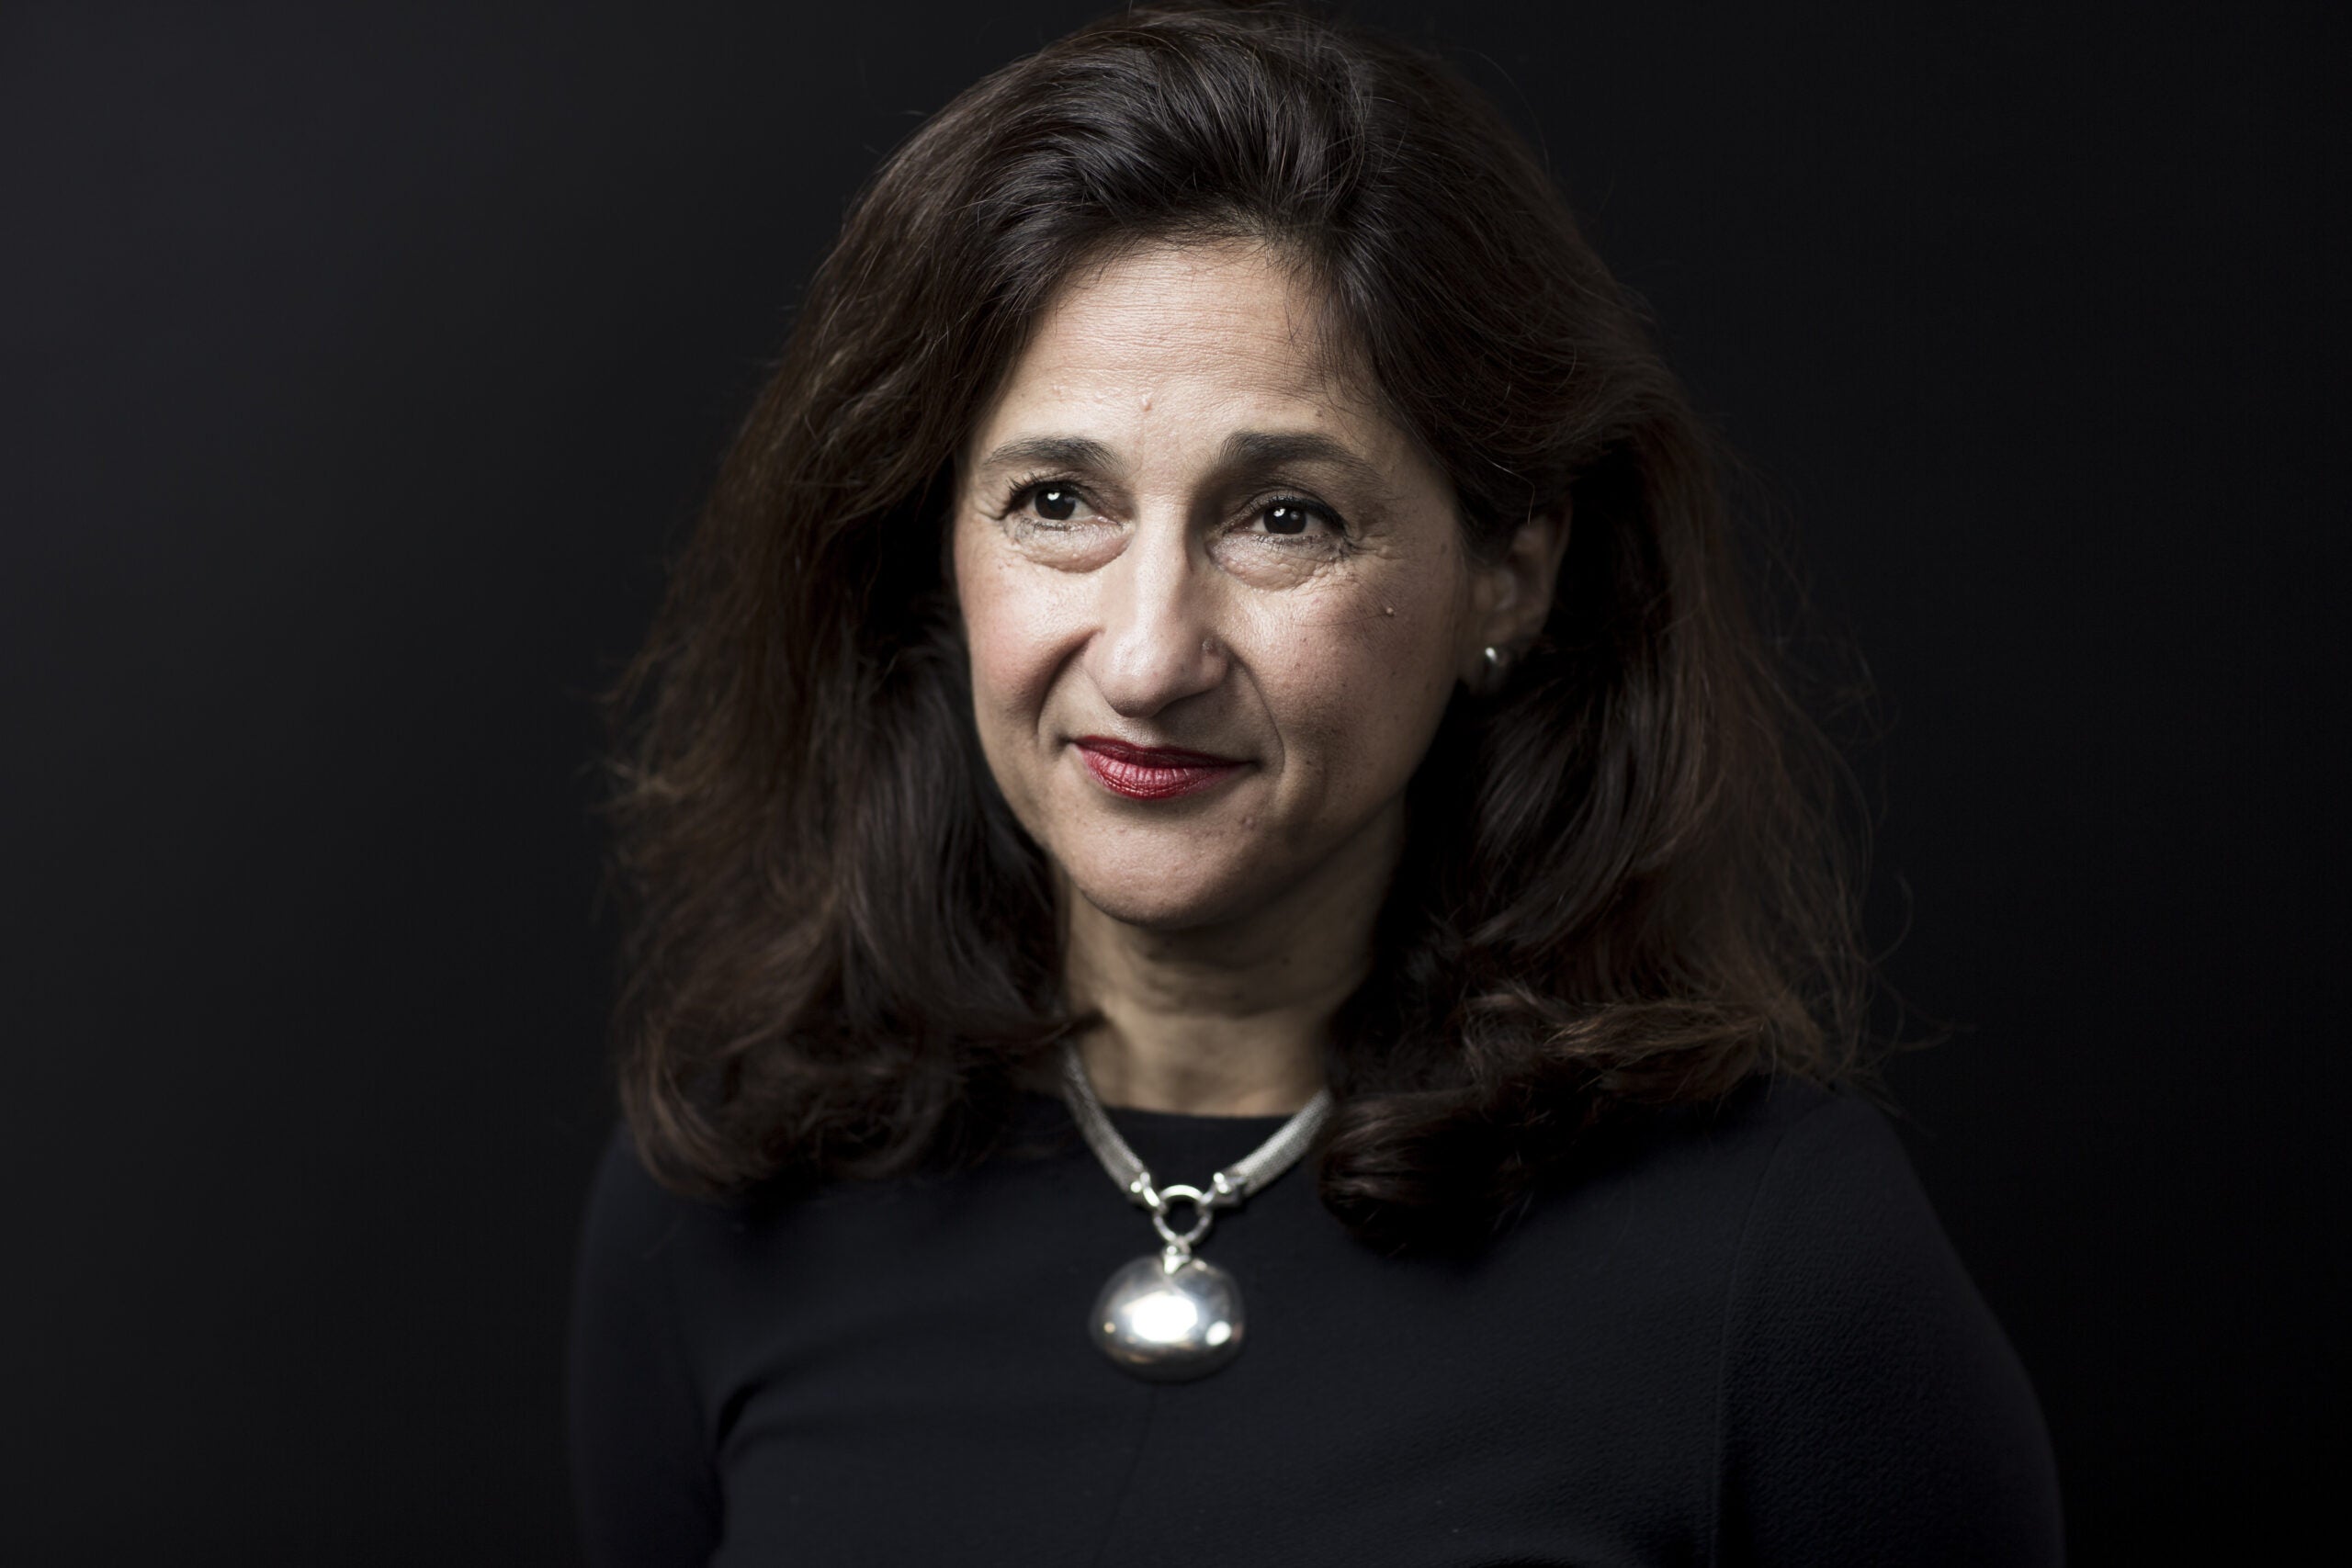 “Why are people so angry?” Minouche Shafik on how the pandemic will change society